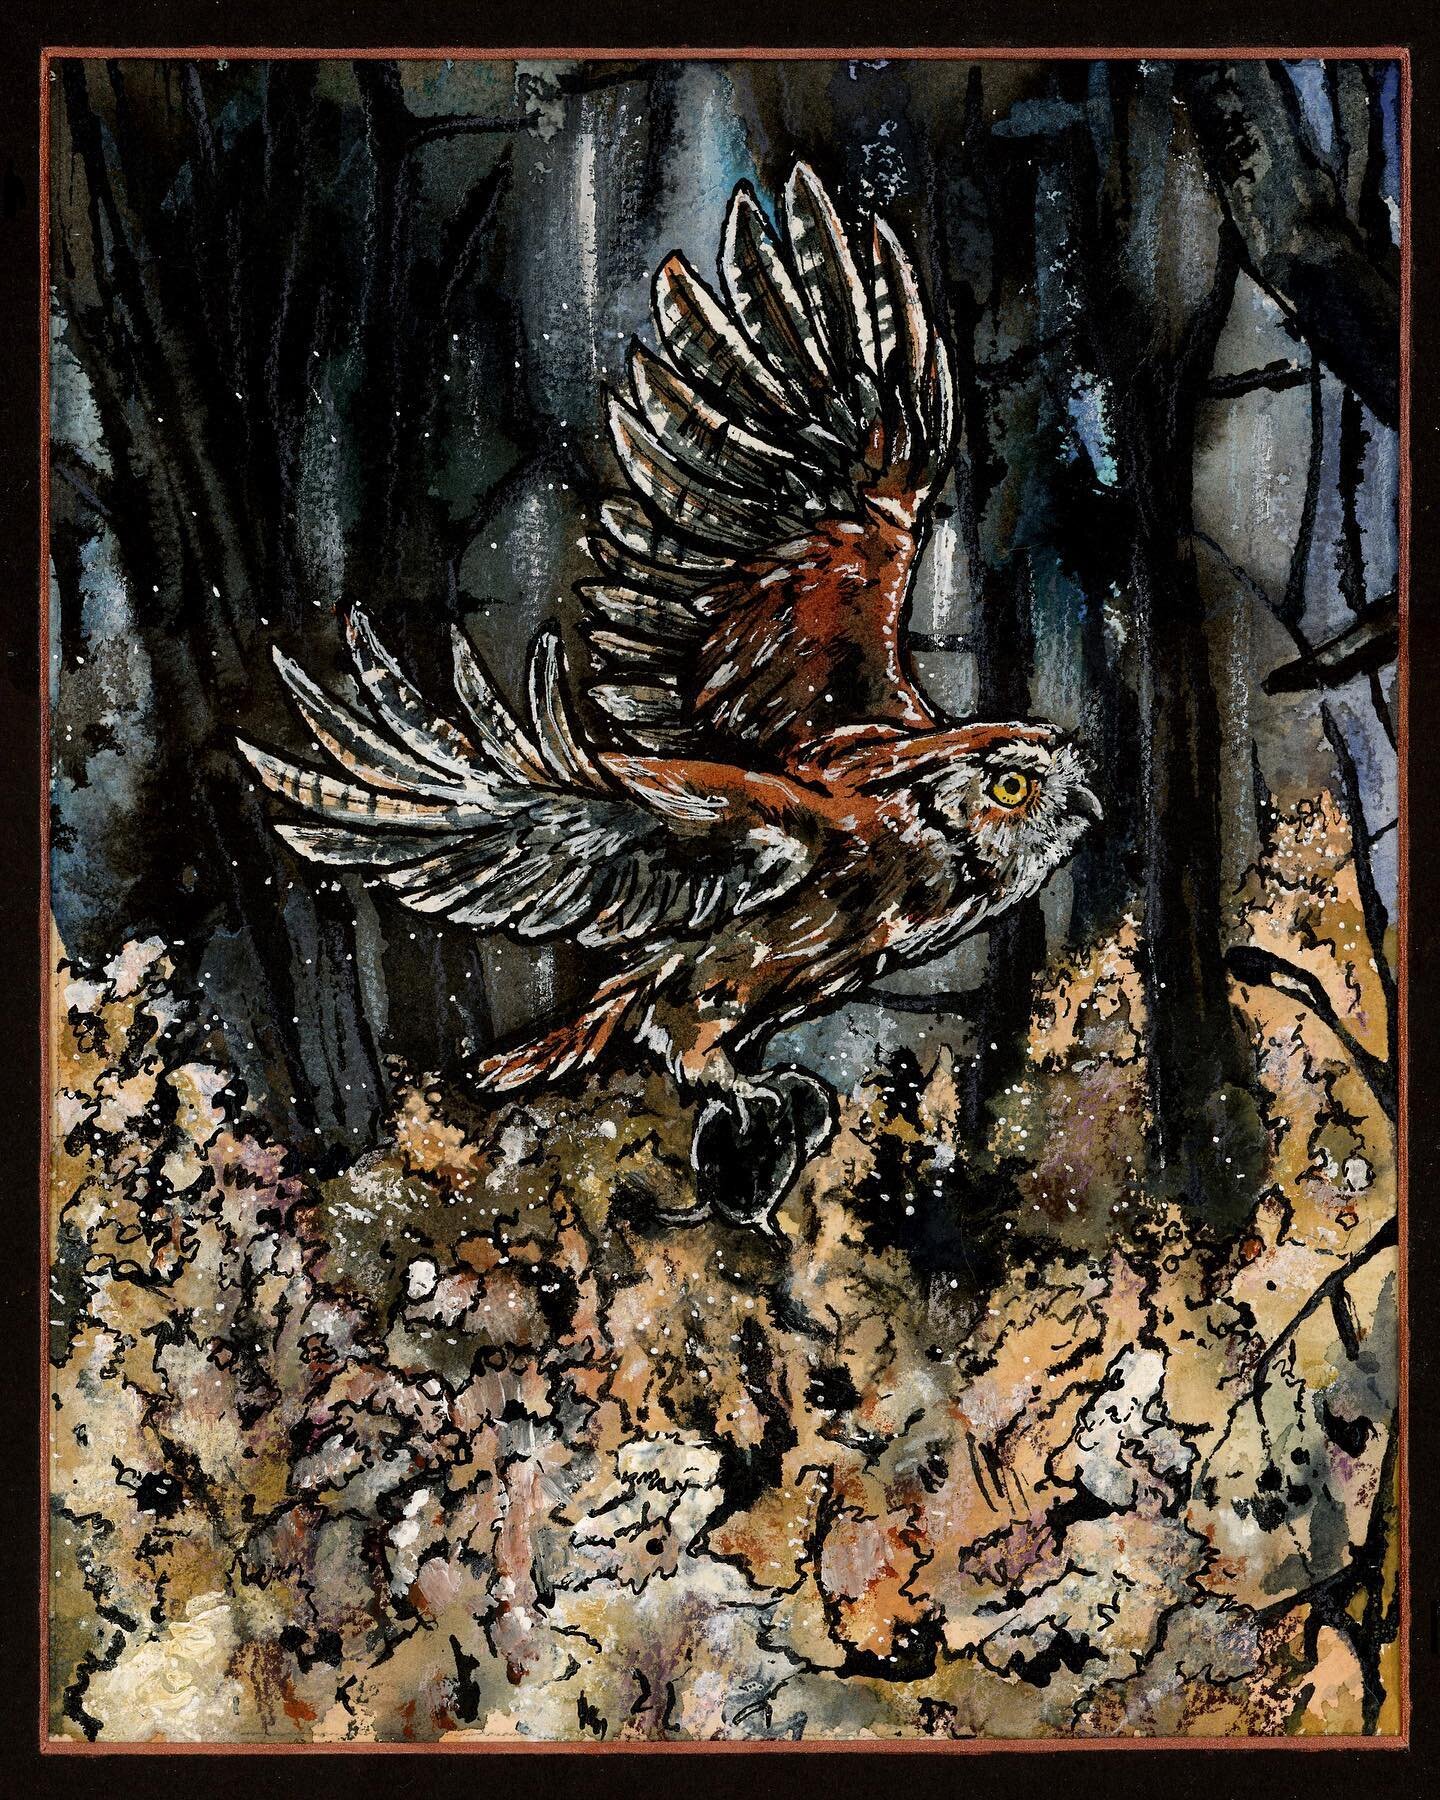 Time to start posting some art again! Just 30 days left until the Biggest Week in American Birding and even less time till I head to my shows in Texas. Here is a painting of an Eastern Screech Owl hunting on the Magee Marsh boardwalk from last years 